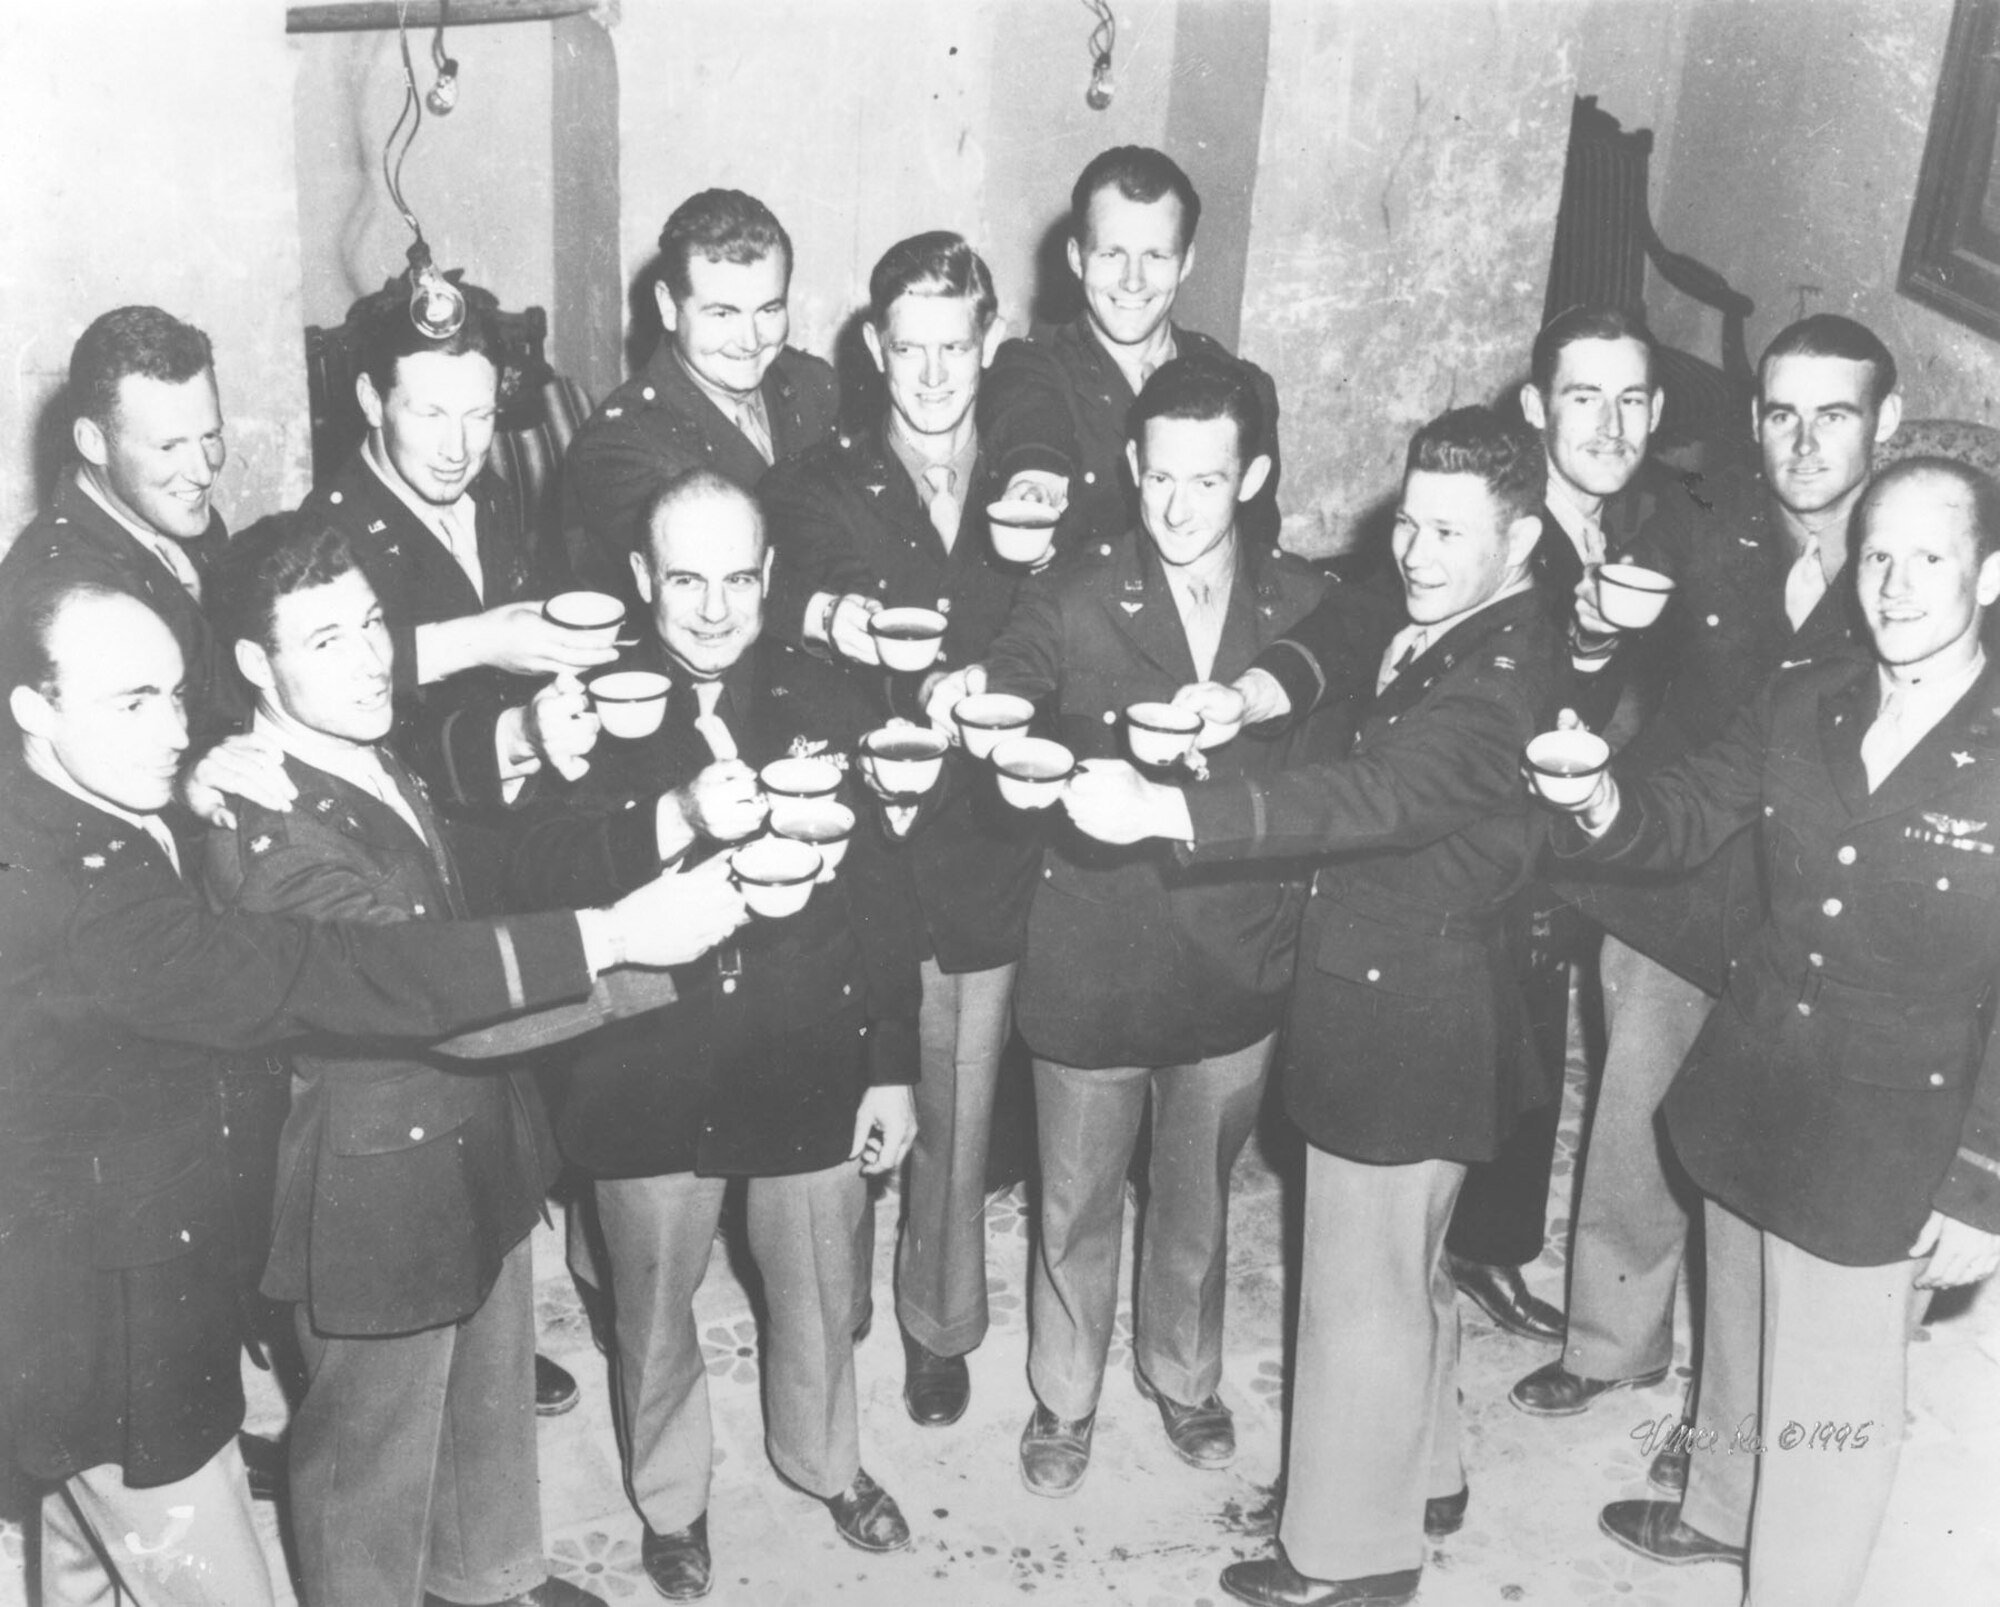 Members of the Doolittle Tokyo Raiders celebrate at an earlier reunion.  (Air Force Photo)